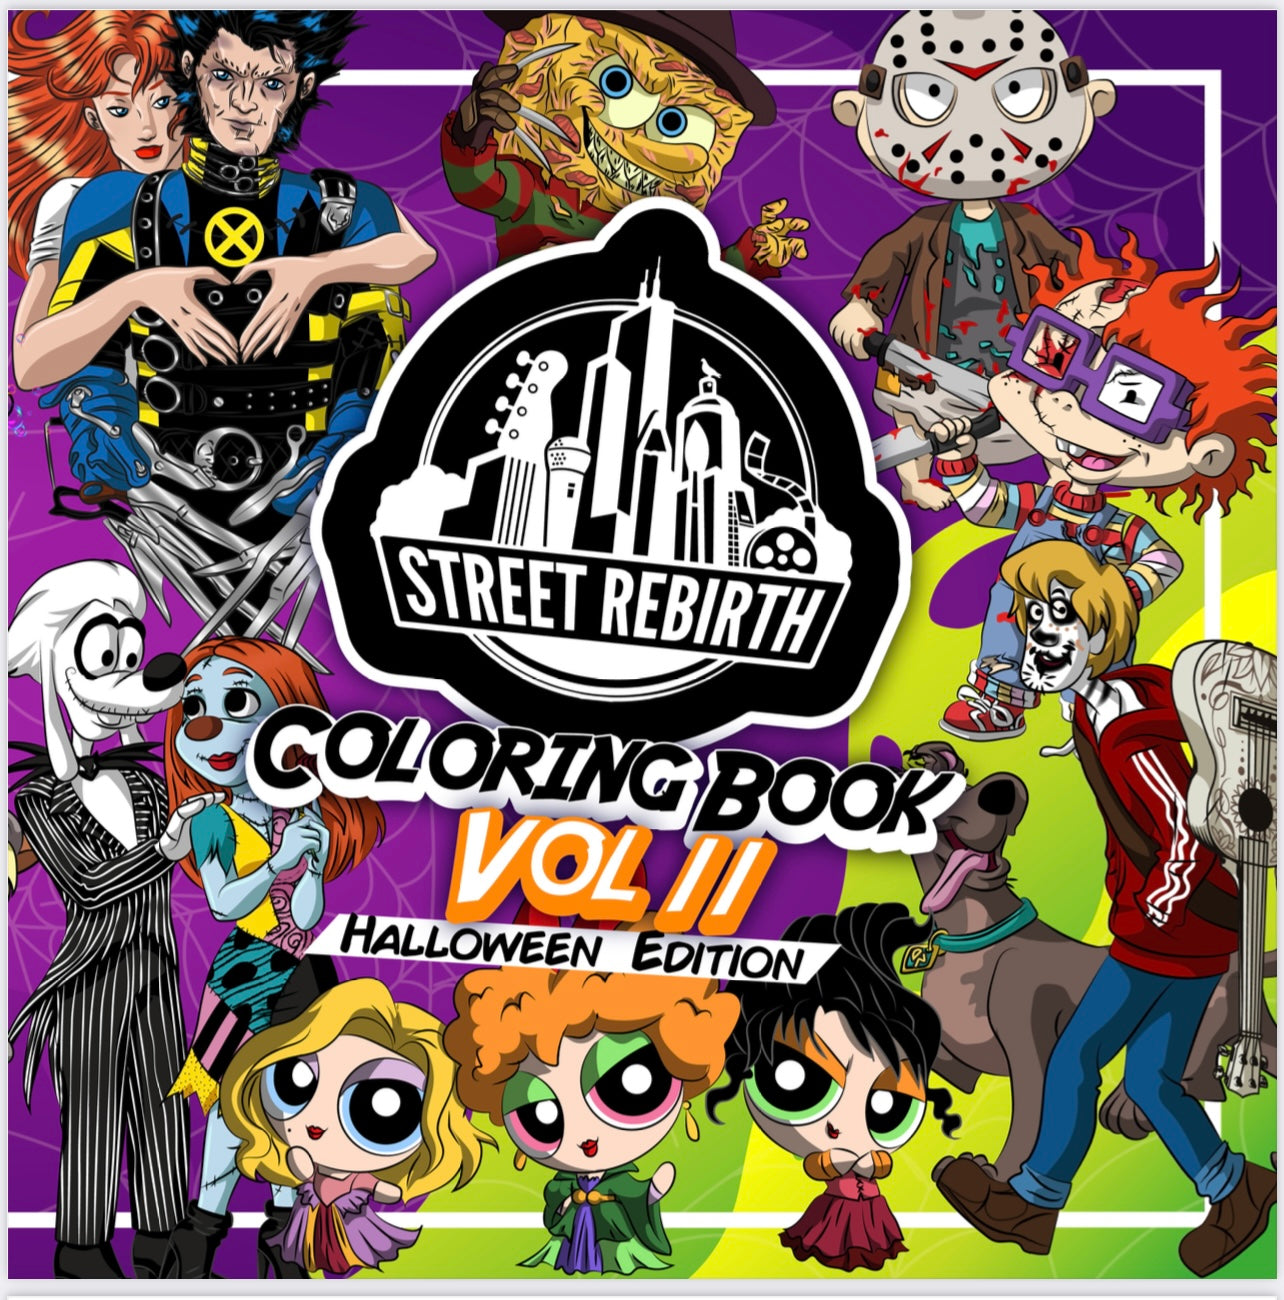 Street Rebirth Coloring Book Vol 2 Halloween Edition - Quotes And Coloring - 28 Designs To Color, 14 Quotes - 10x10 Size